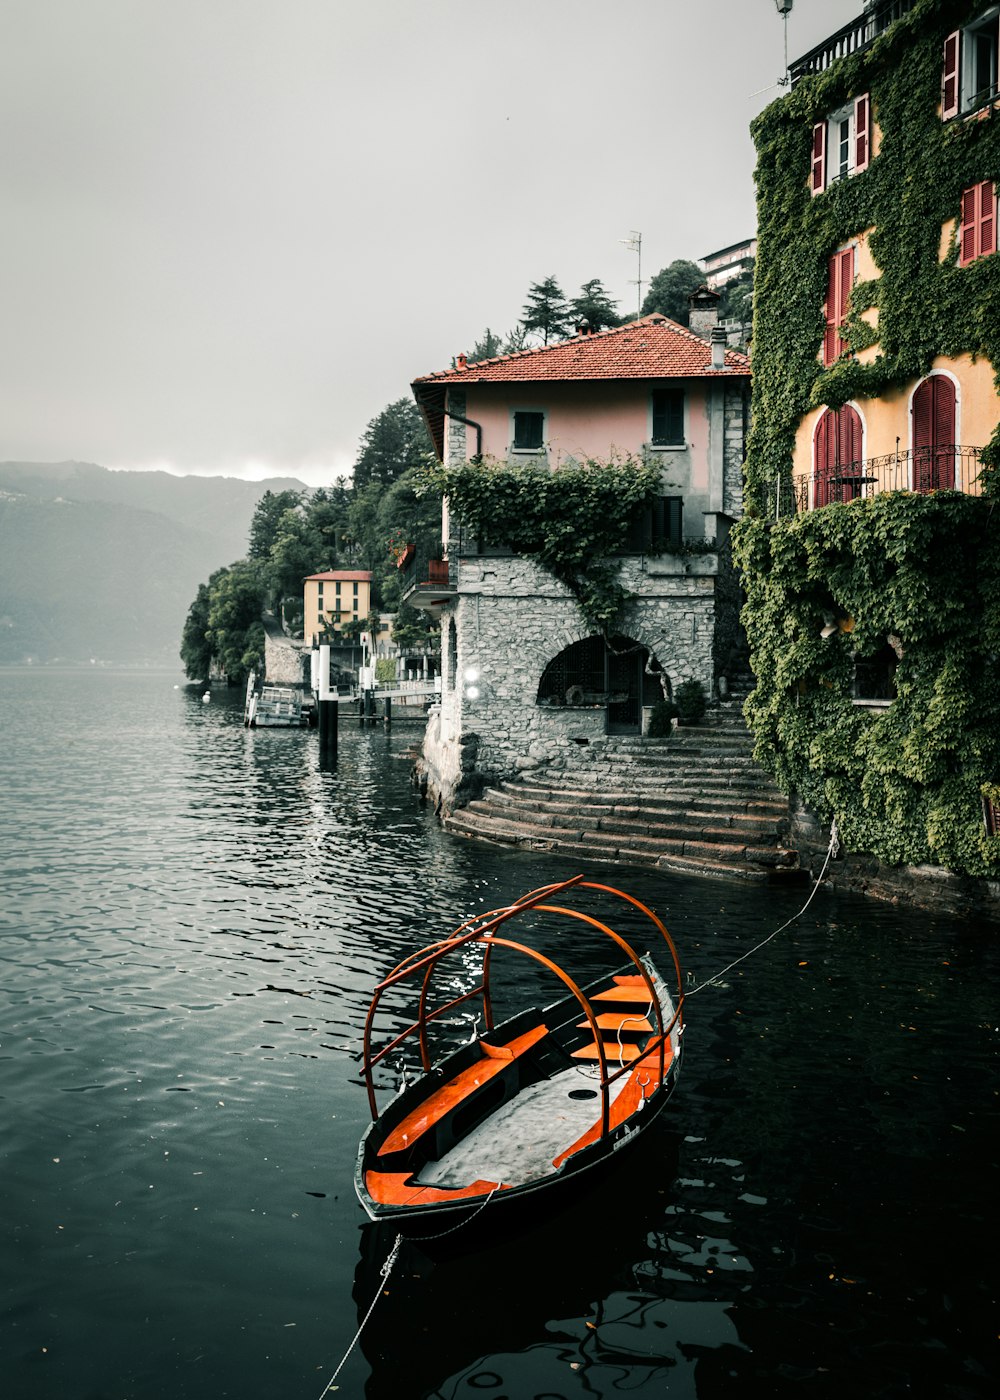 a small boat tied to a dock in a body of water